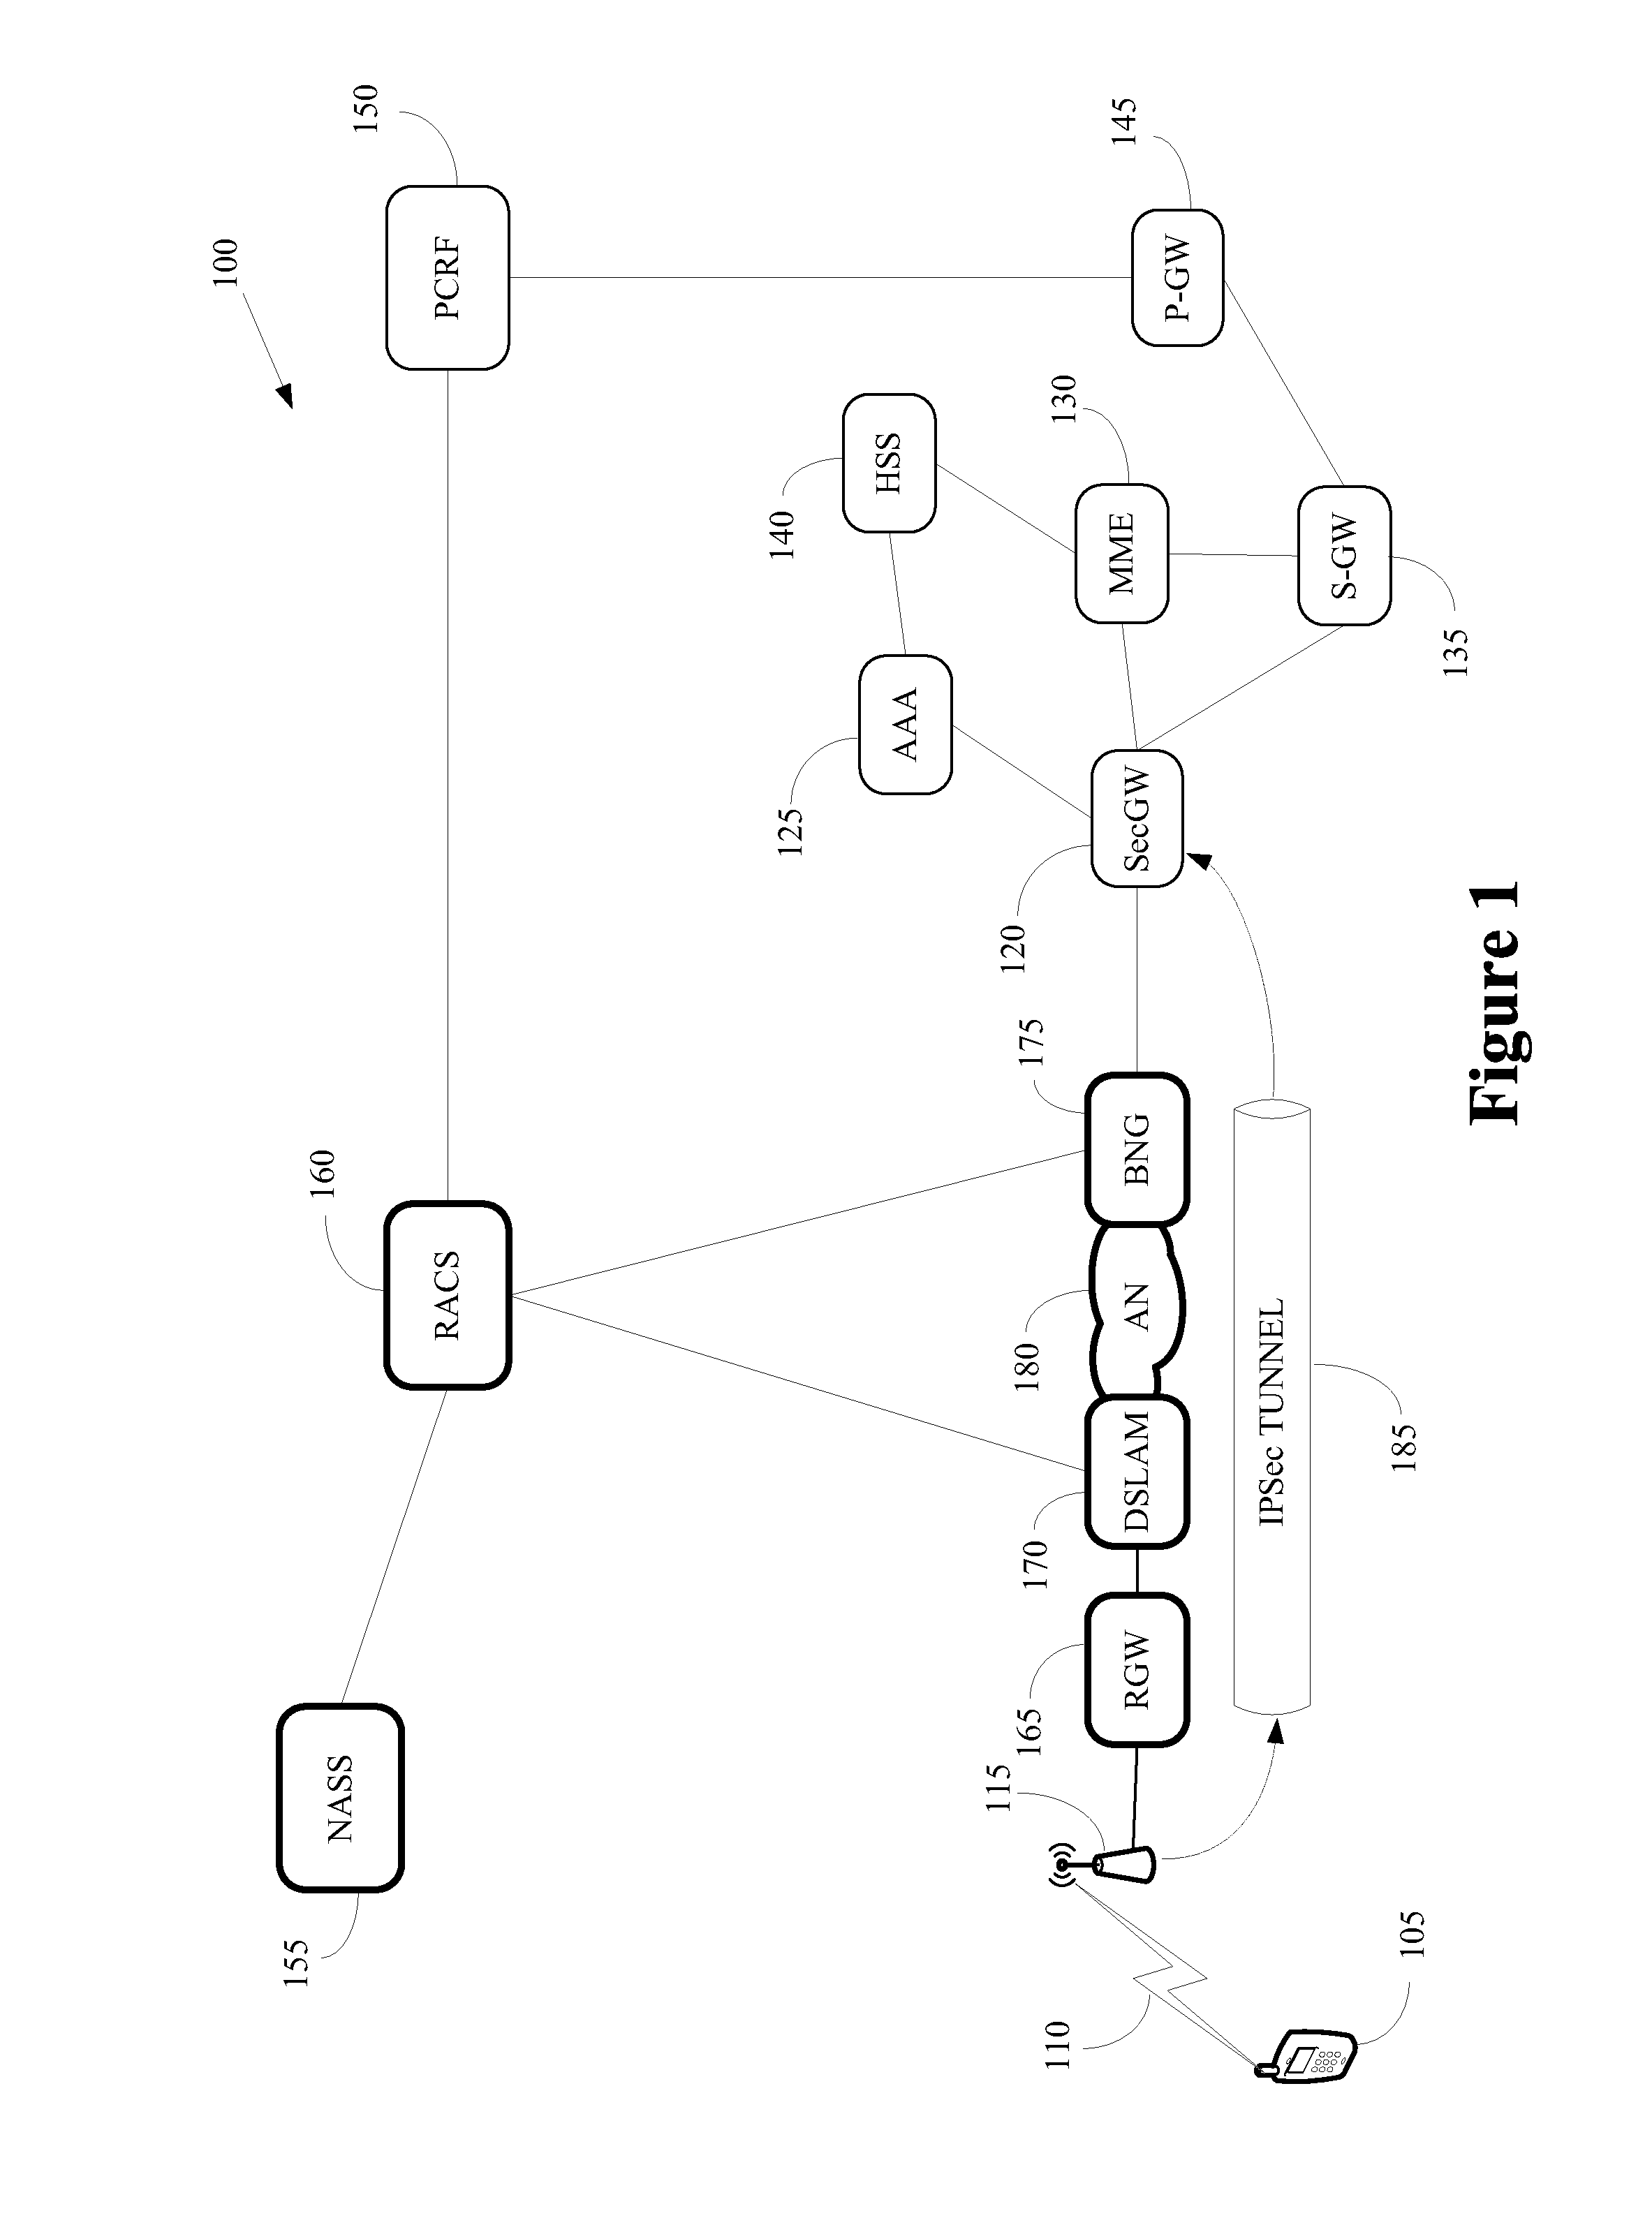 Method of call admission control for home femtocells